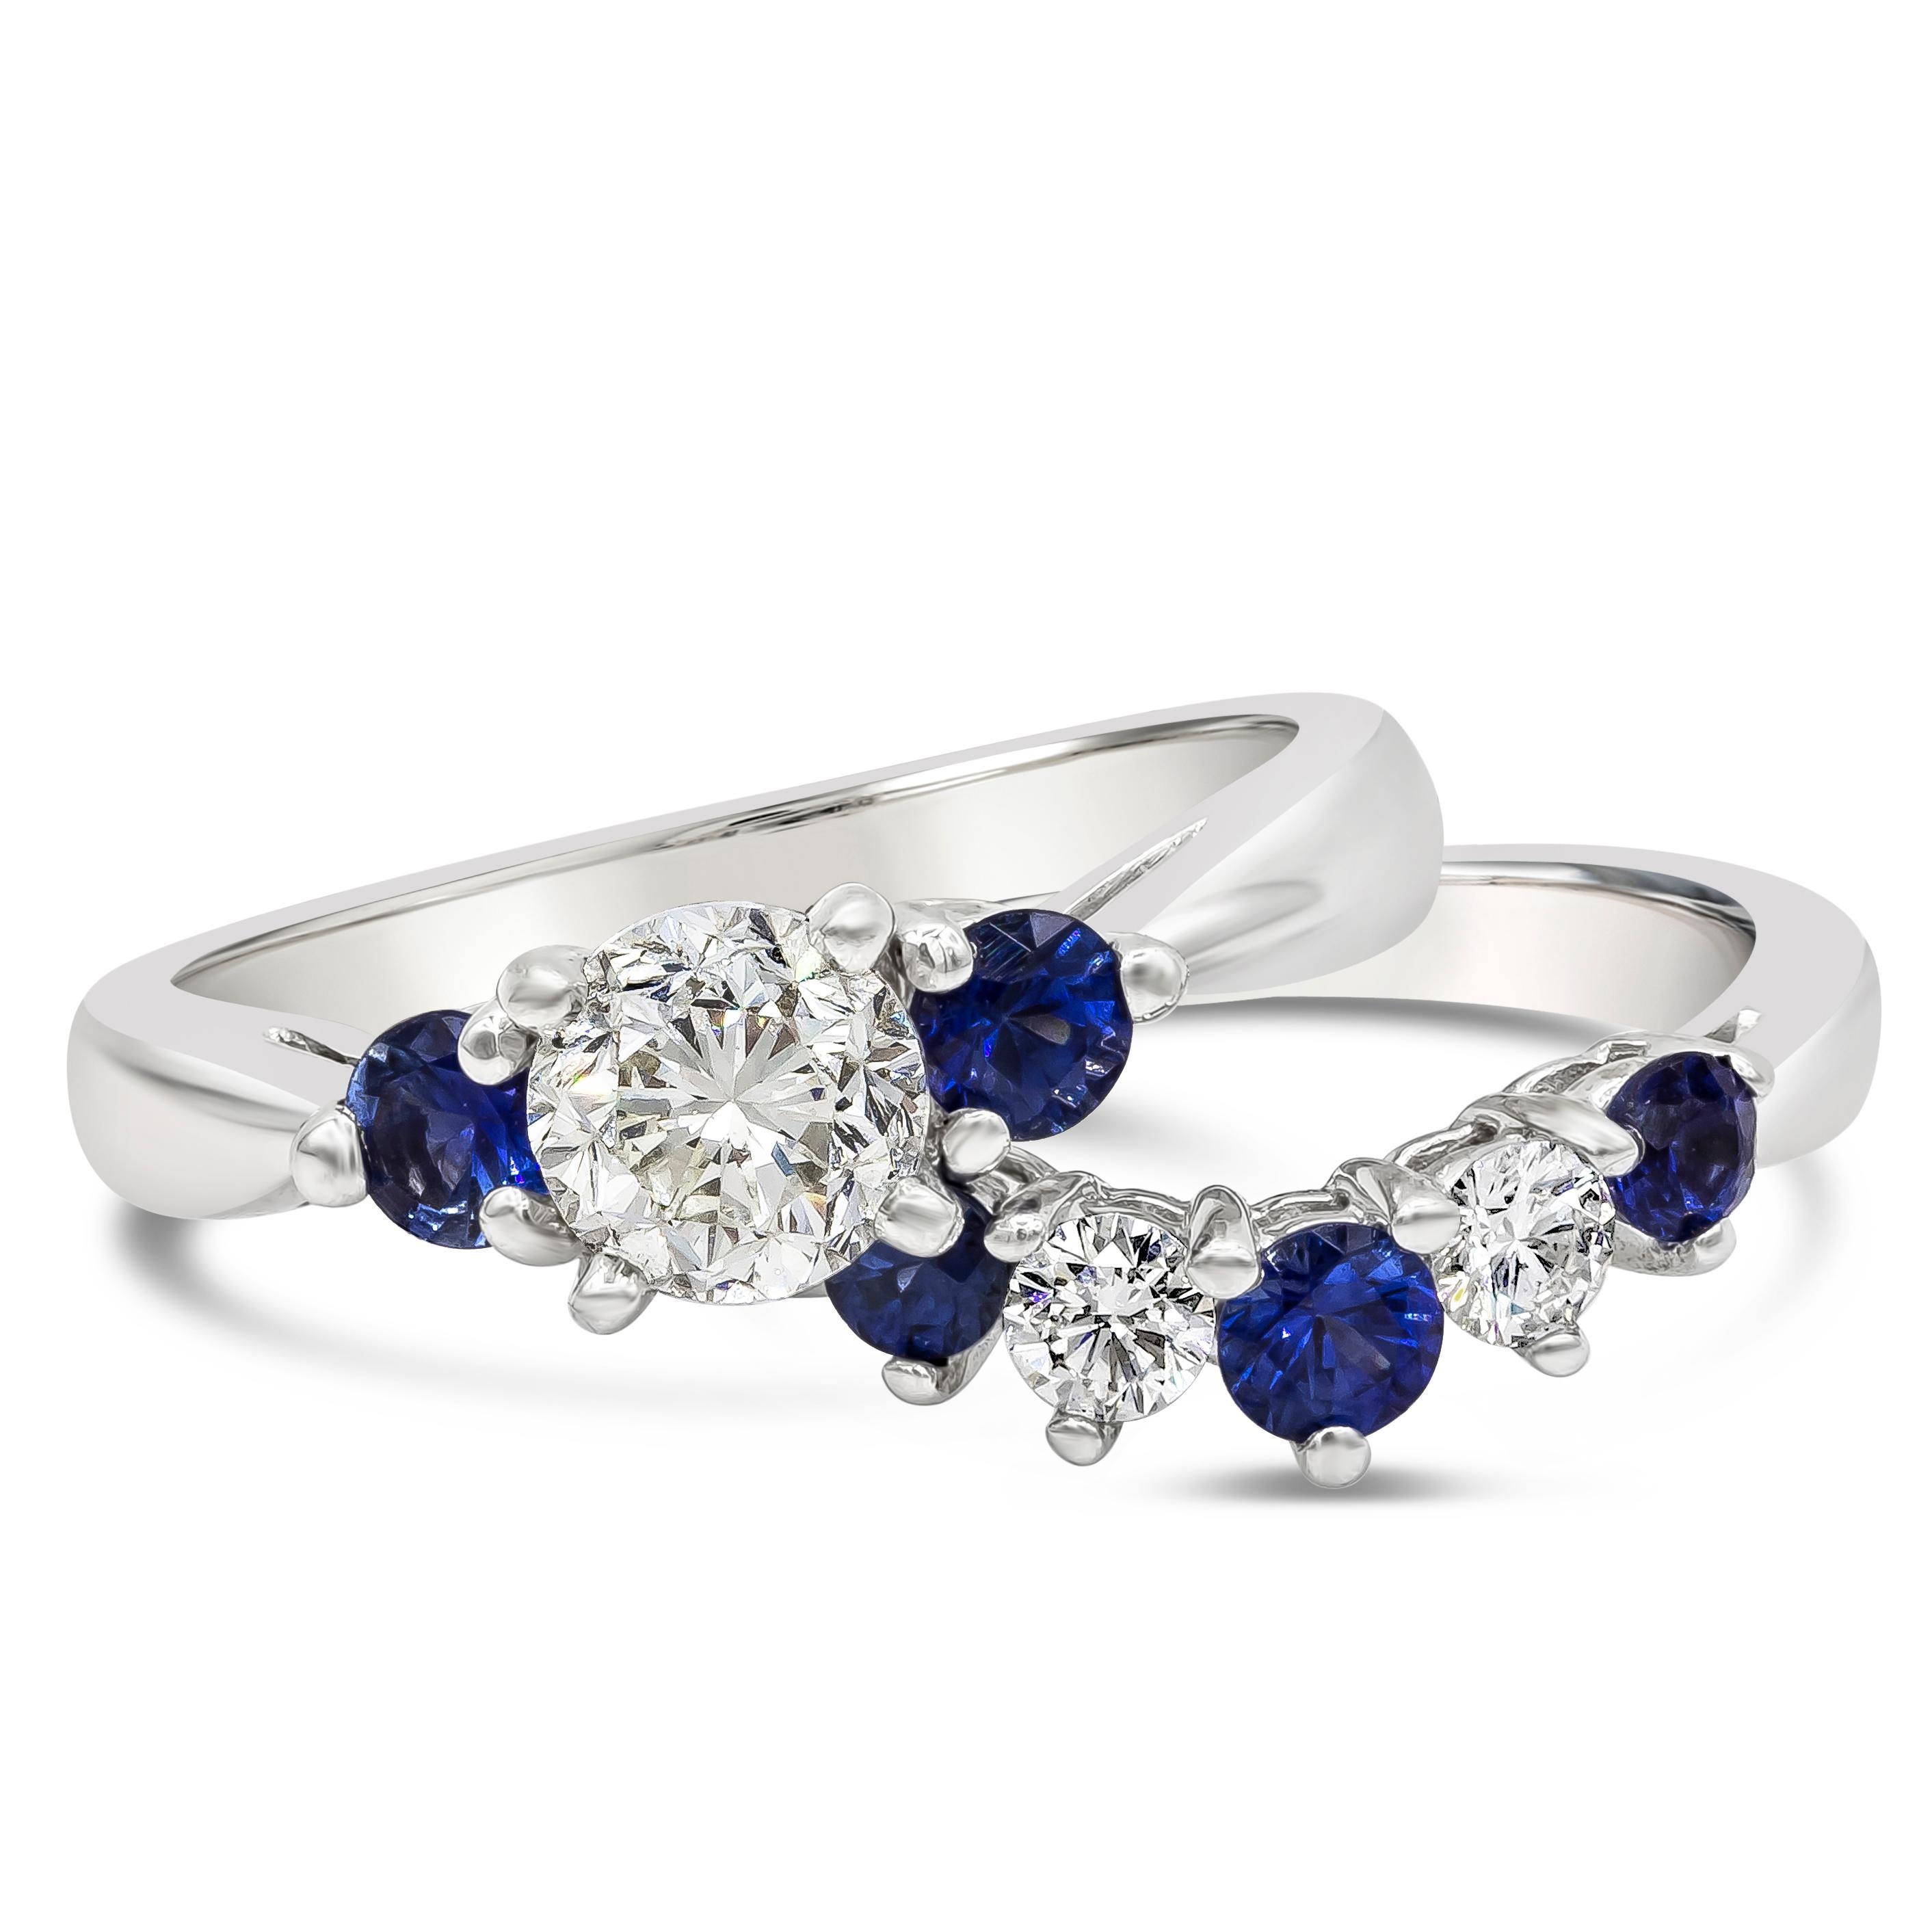 A beautiful and color-rich engagement ring and wedding band set. The engagement ring features a 1.01 carats round brilliant center diamond, EGL Certified as I color and VS2 in clarity, flanked by two blue sapphires. The wedding band showcases blue